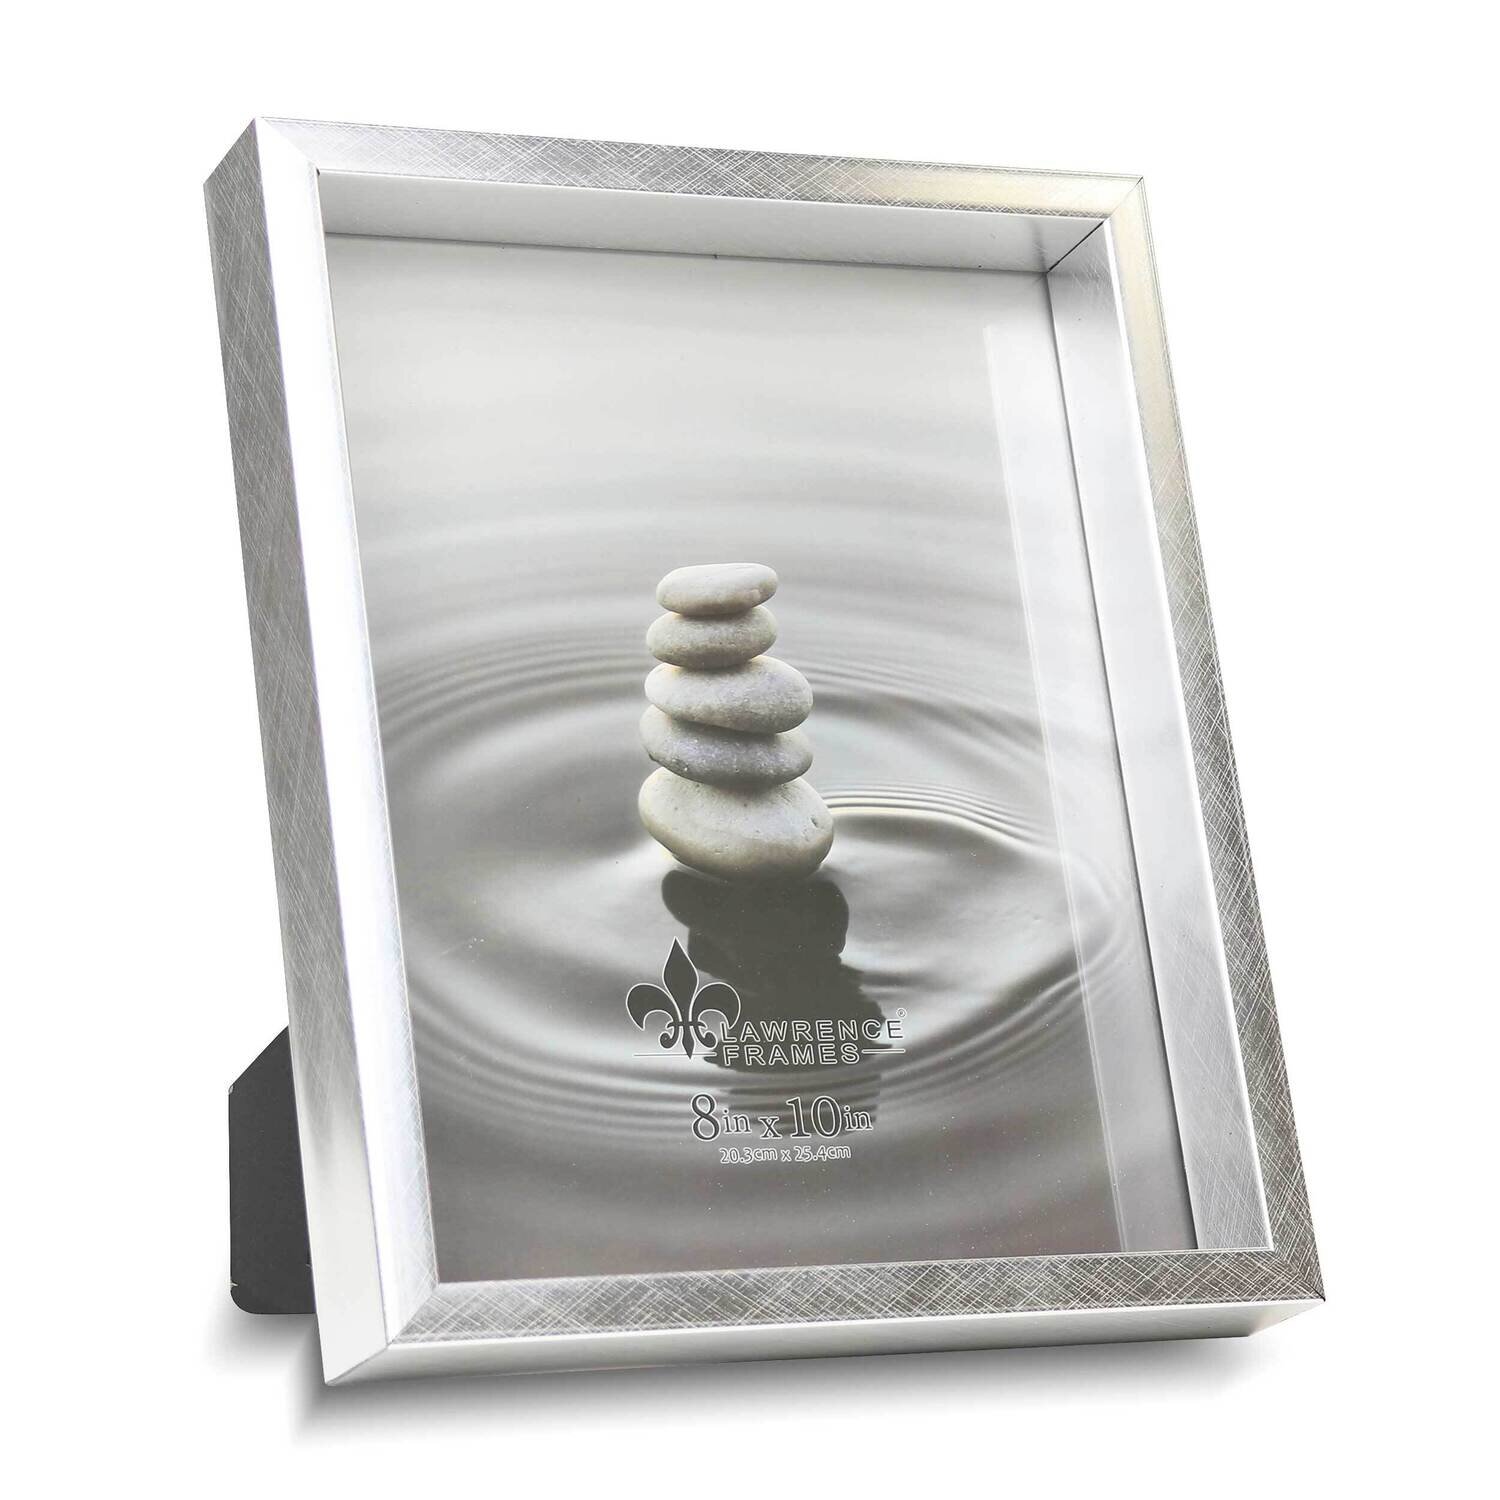 Tribeca Deep Set Silver-tone Satin 8 x 10 Inch Photo Picture Frame GM25466